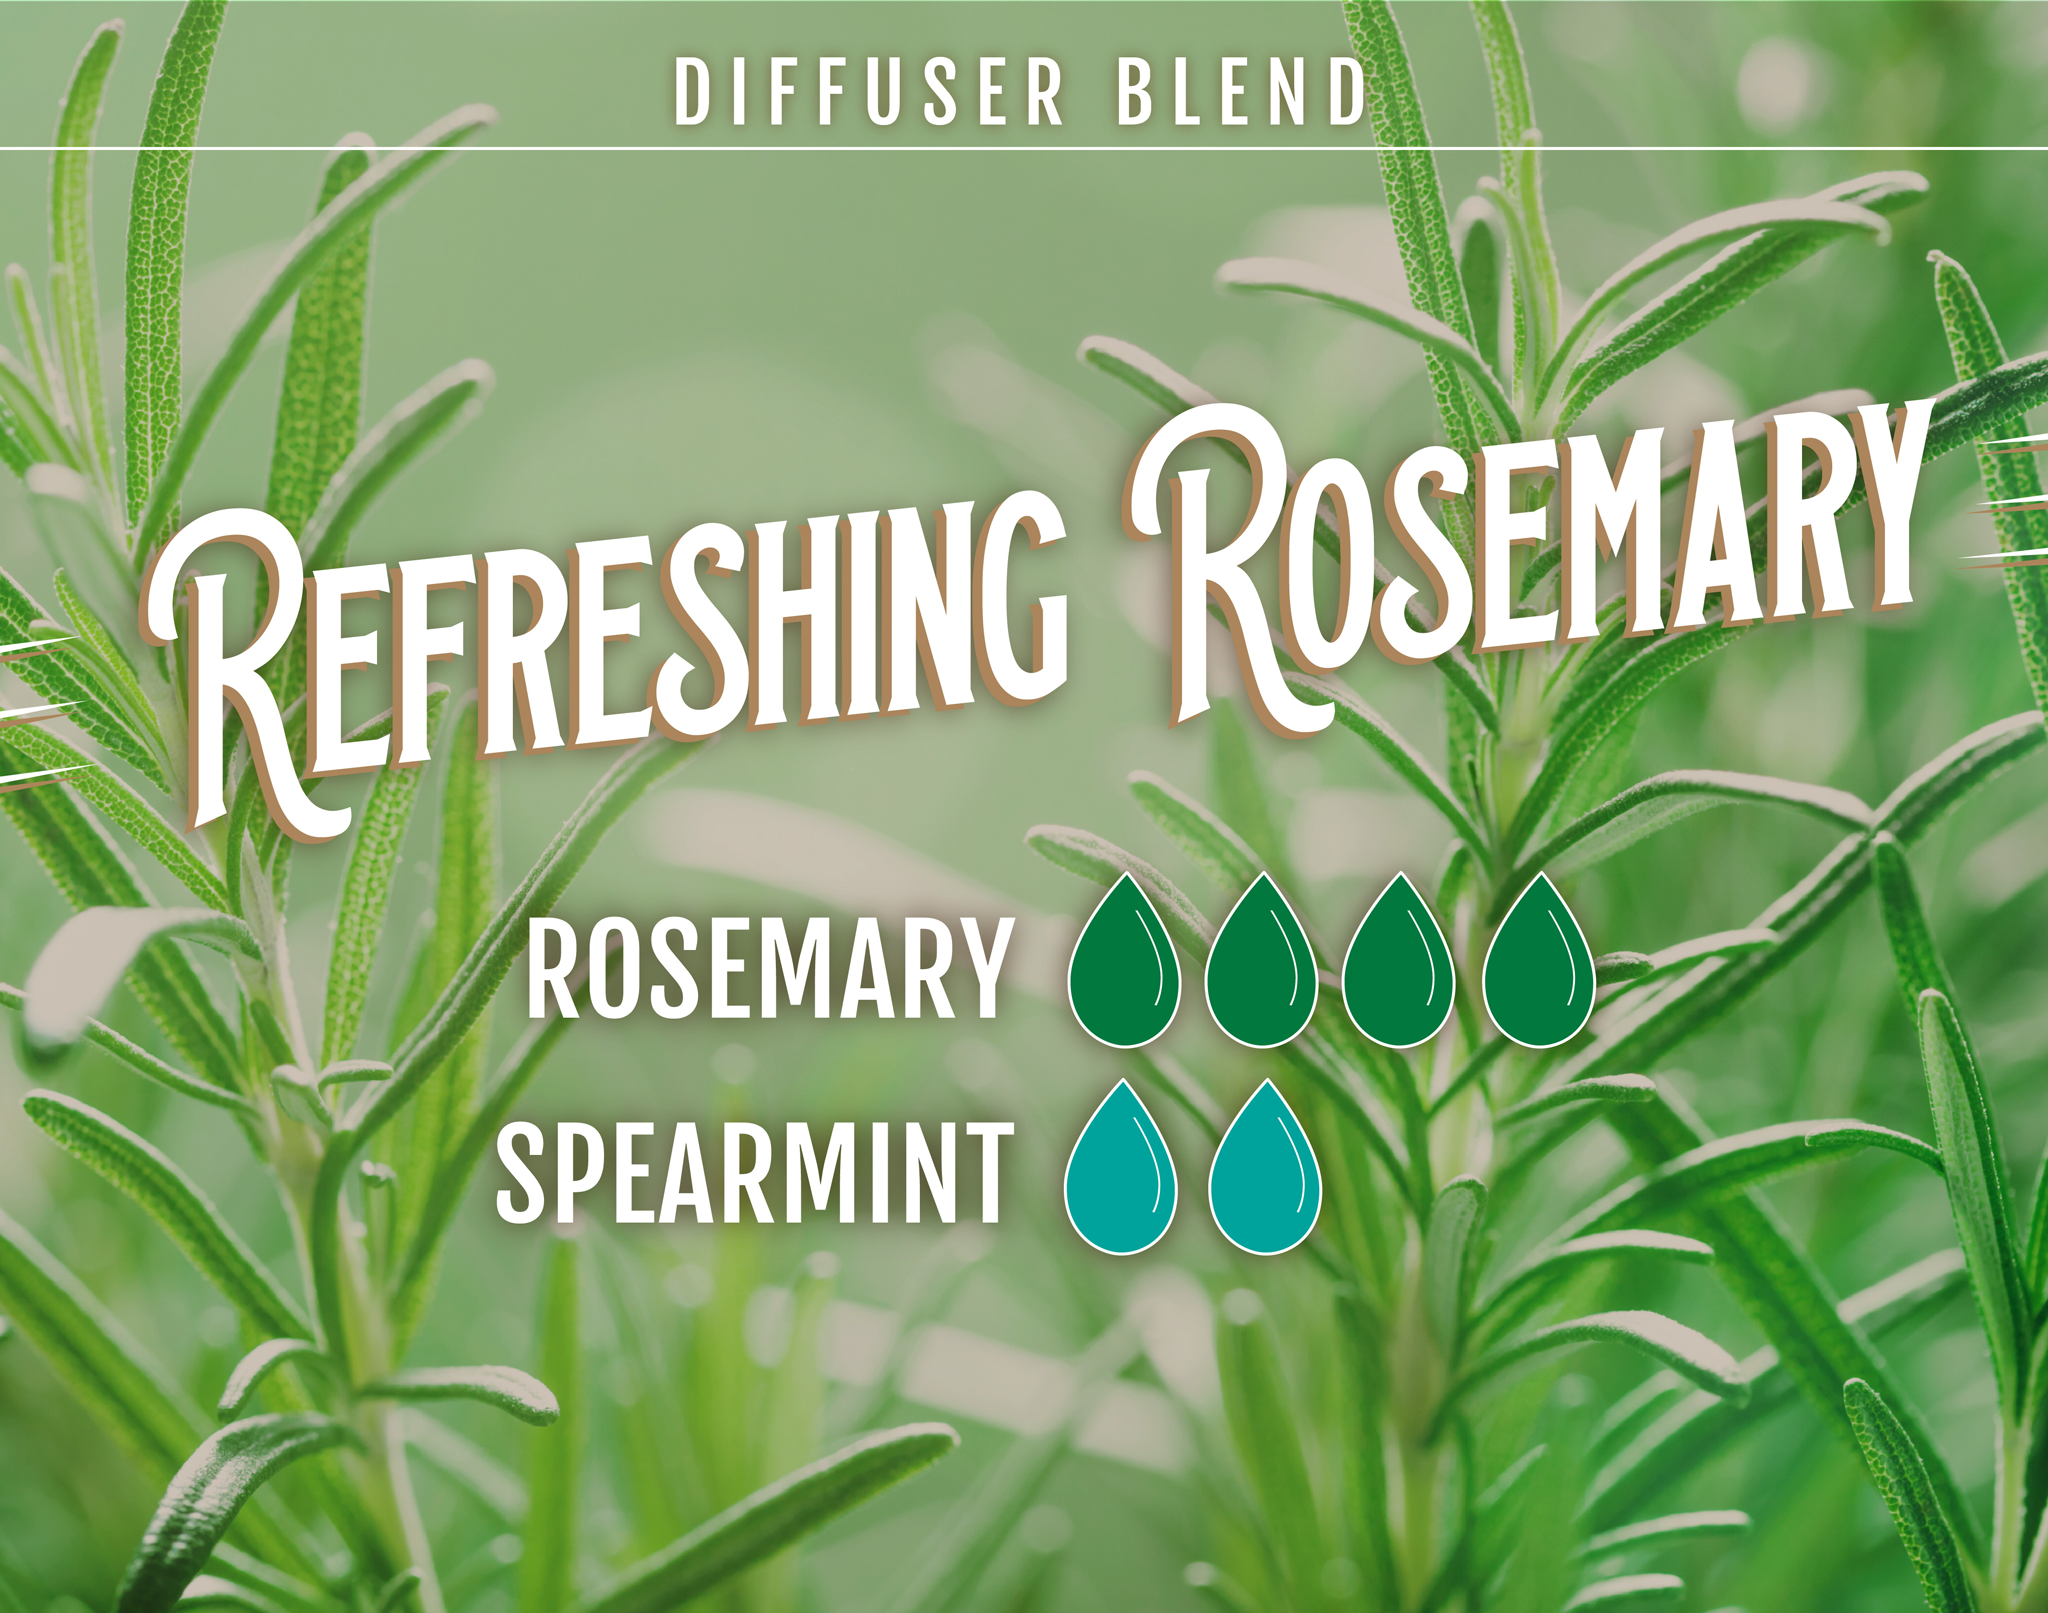 Refreshing Rosemary Diffuser Blend - 4 drops of Rosemary, 2 Drops of Spearmint